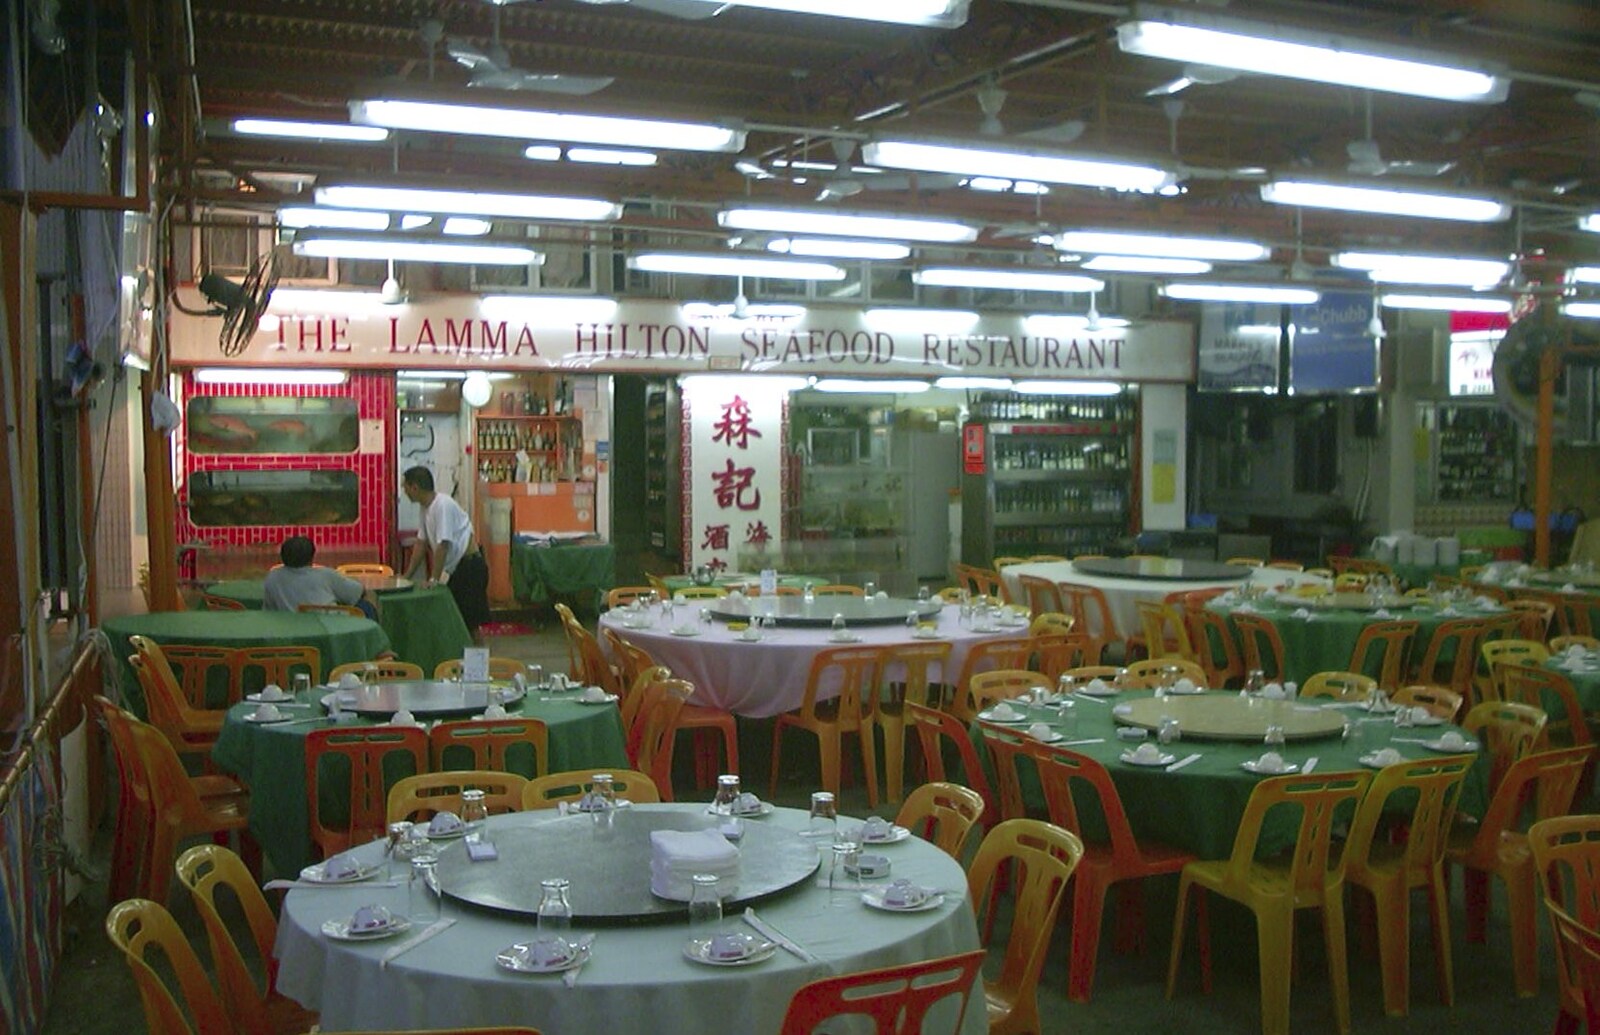 Lamma Island, Hong Kong, China - 20th August 2001: Another view of the Lamma Hilton's tables